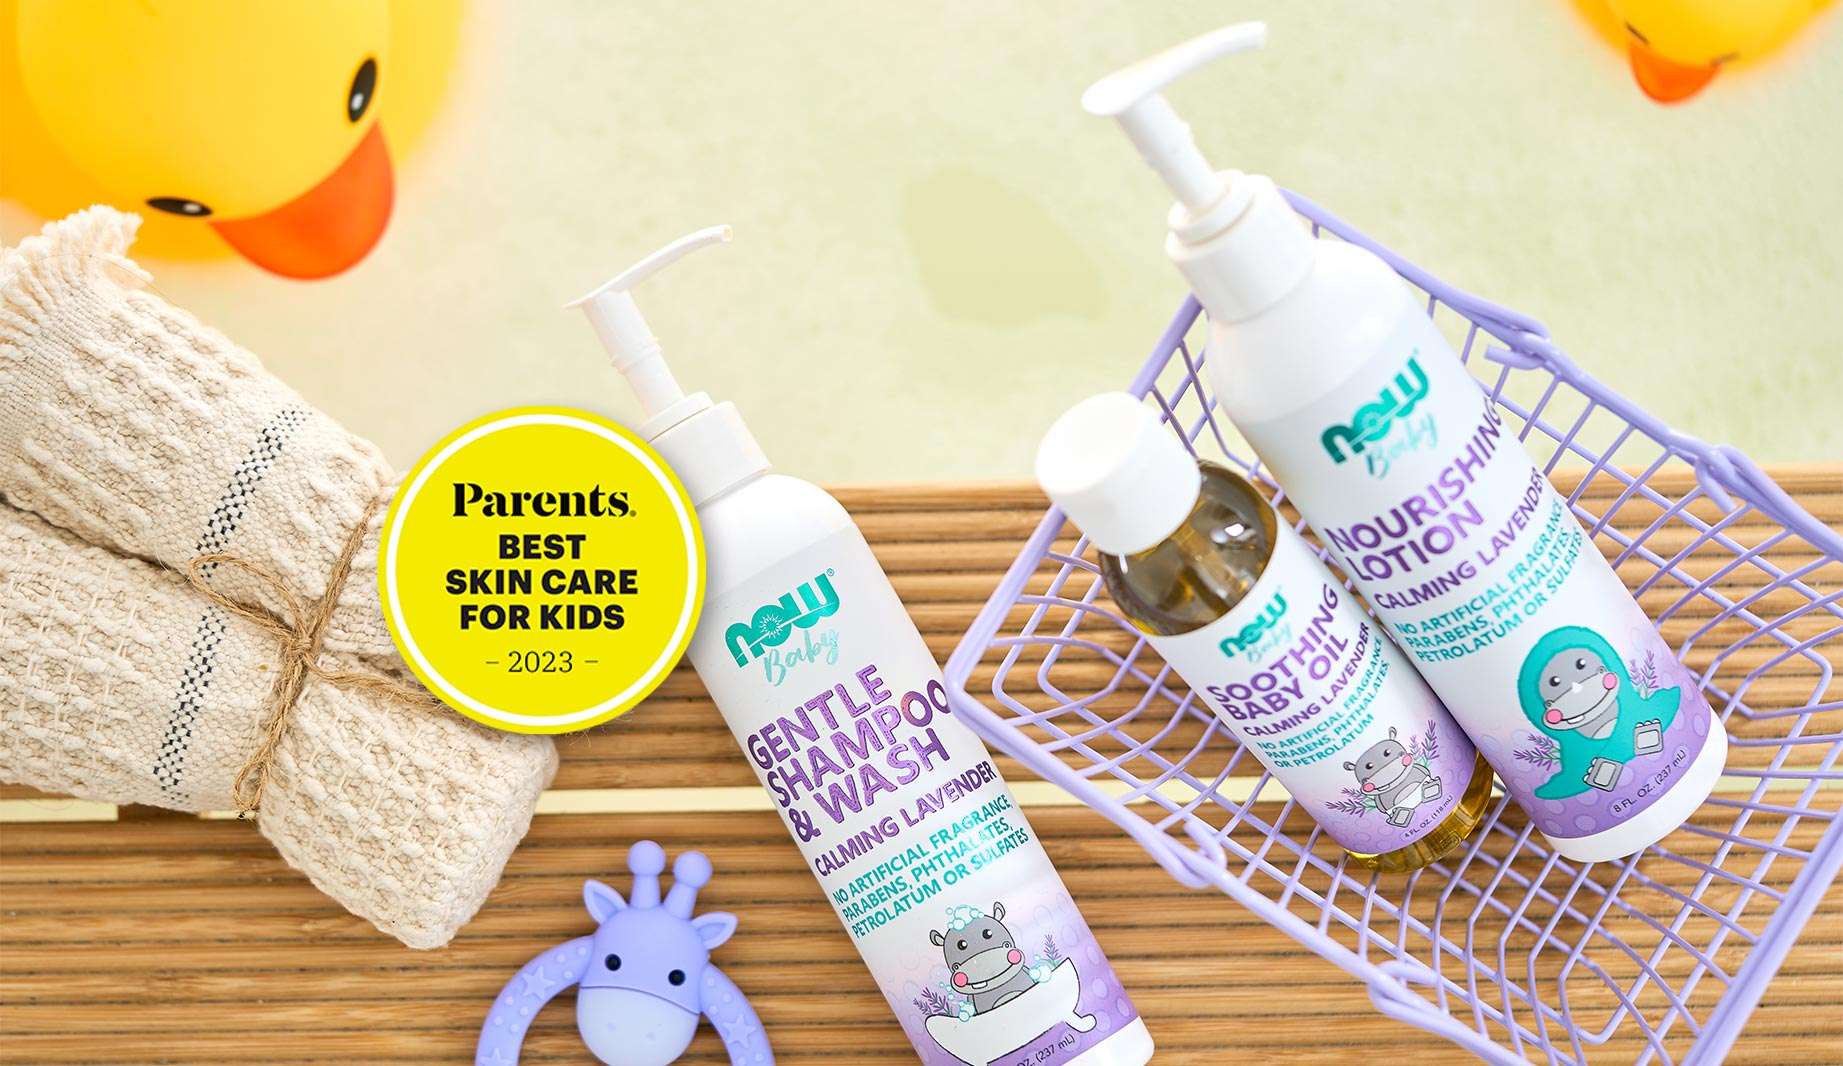 NOW baby Products Gentle Shampoo & Wash Calming Lavender with Parents® Best skin Care for Kids 2023 award. Soothing Baby Oil and Nourishing Lotion Calming Lavender 